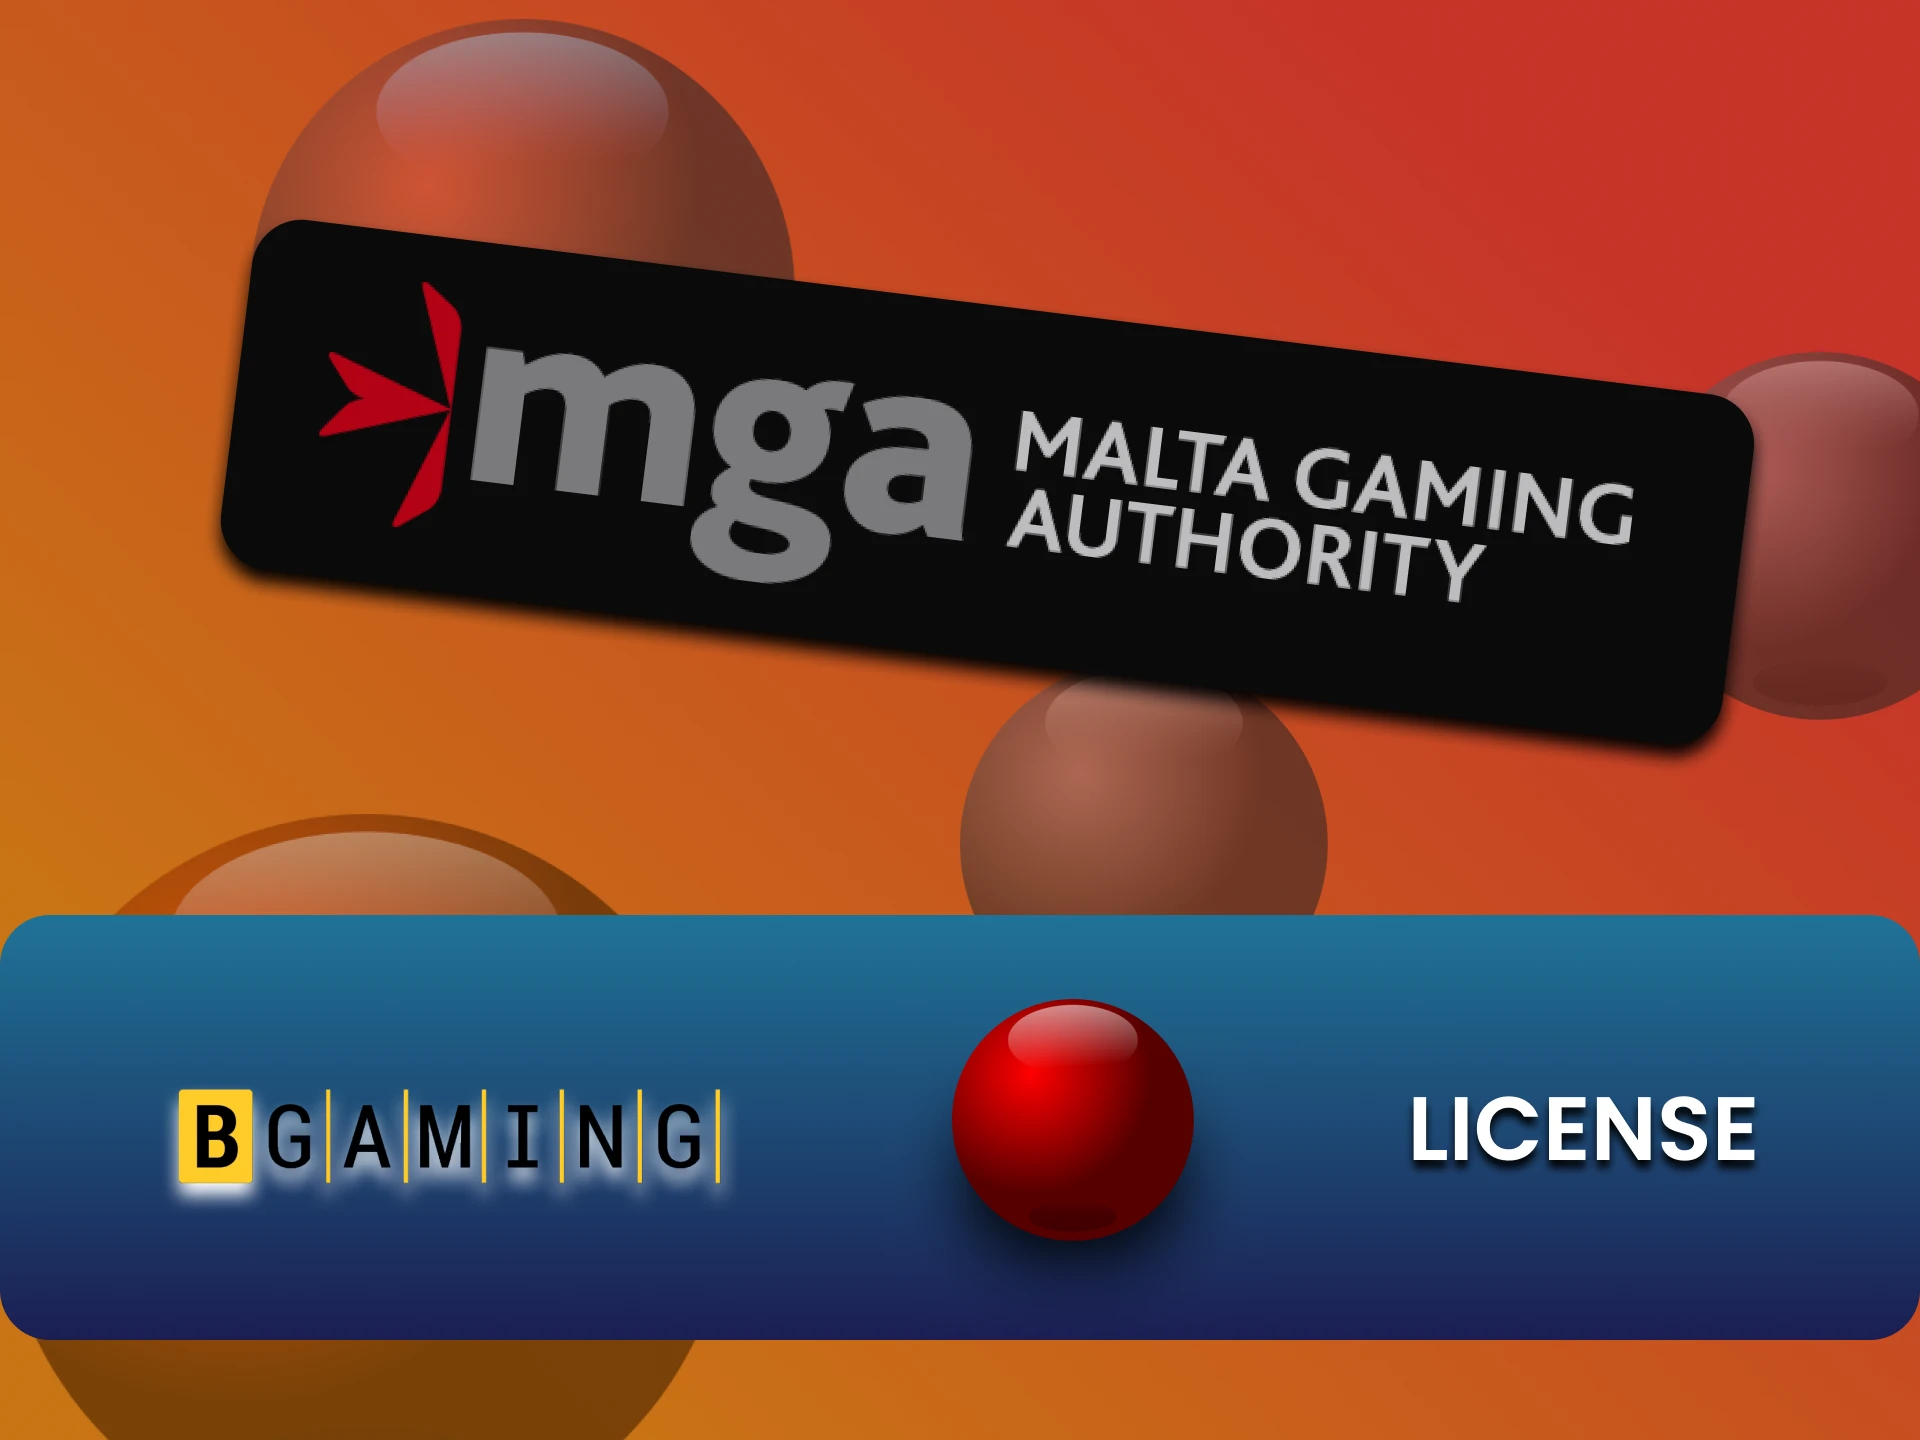 Games from BGaming are licensed.